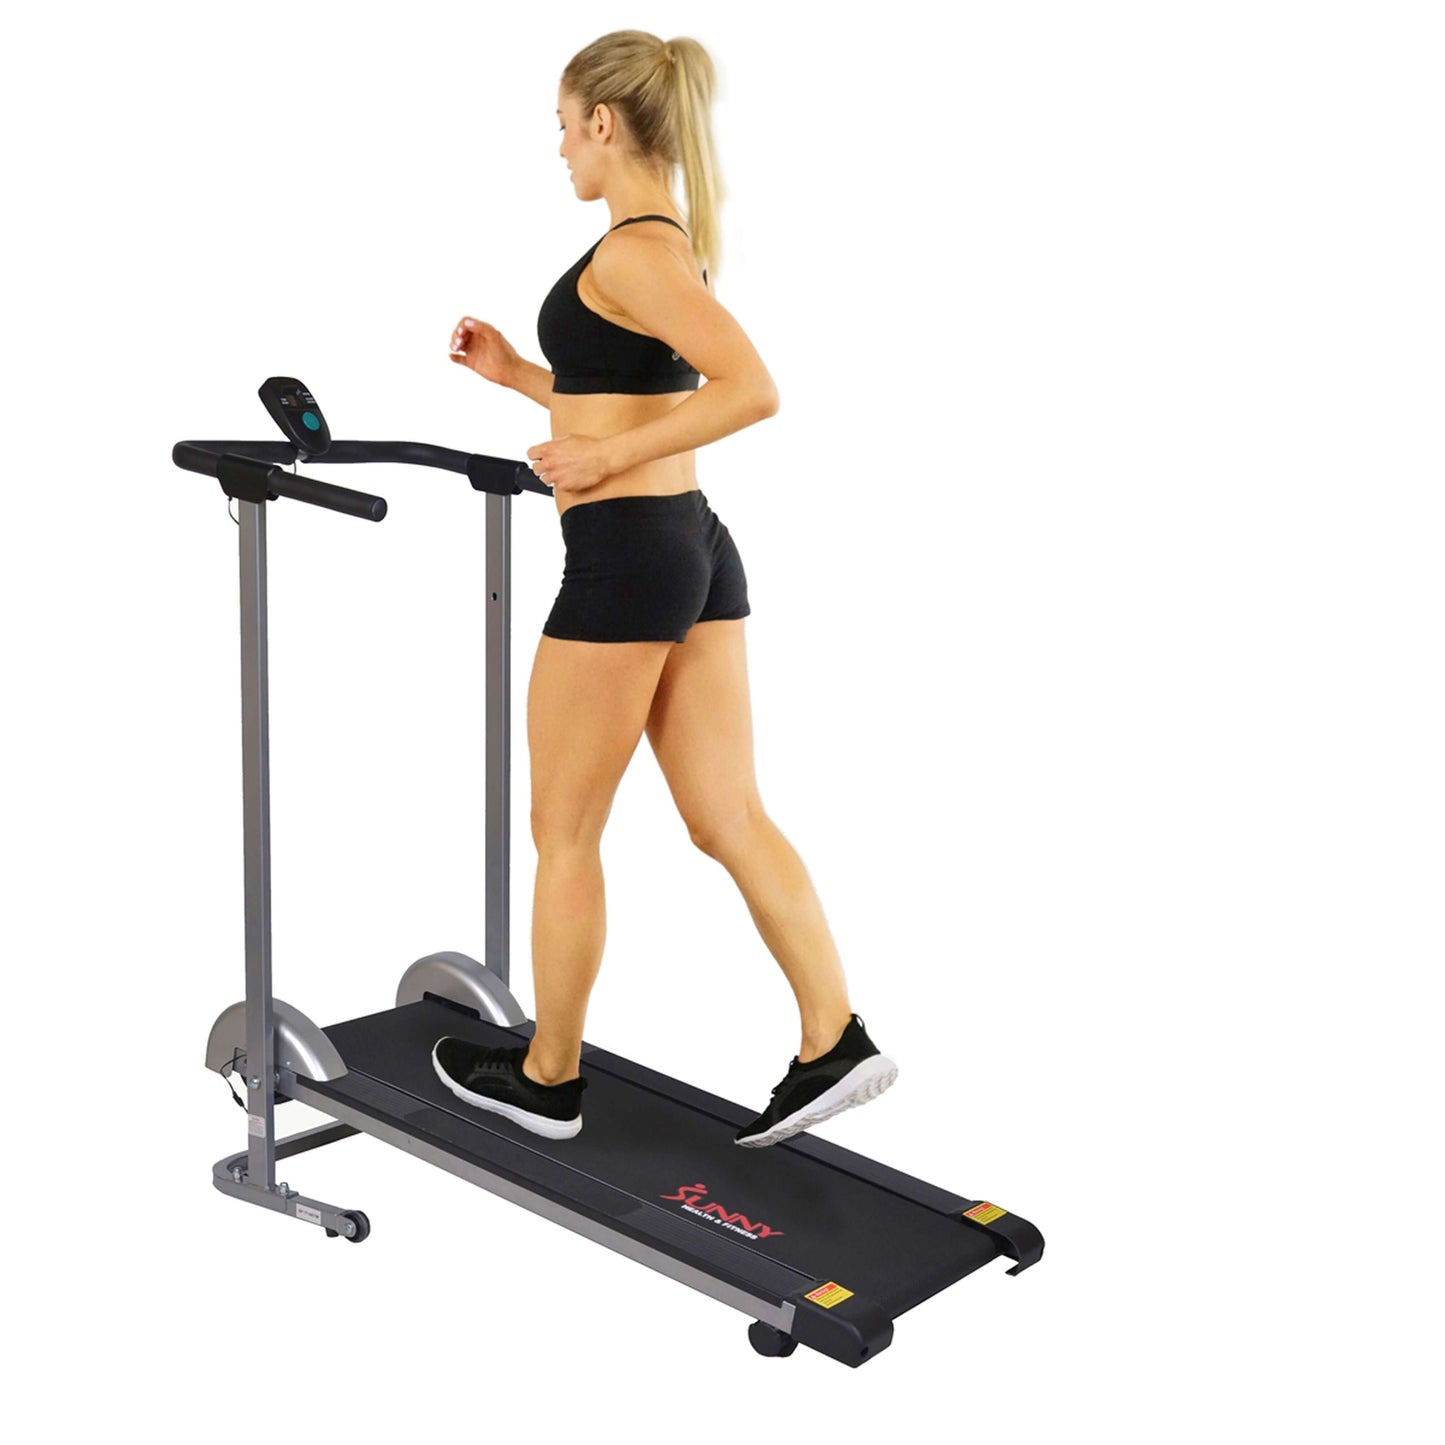 Sunny Health & Fitness Manual Walking Treadmill-side view with model